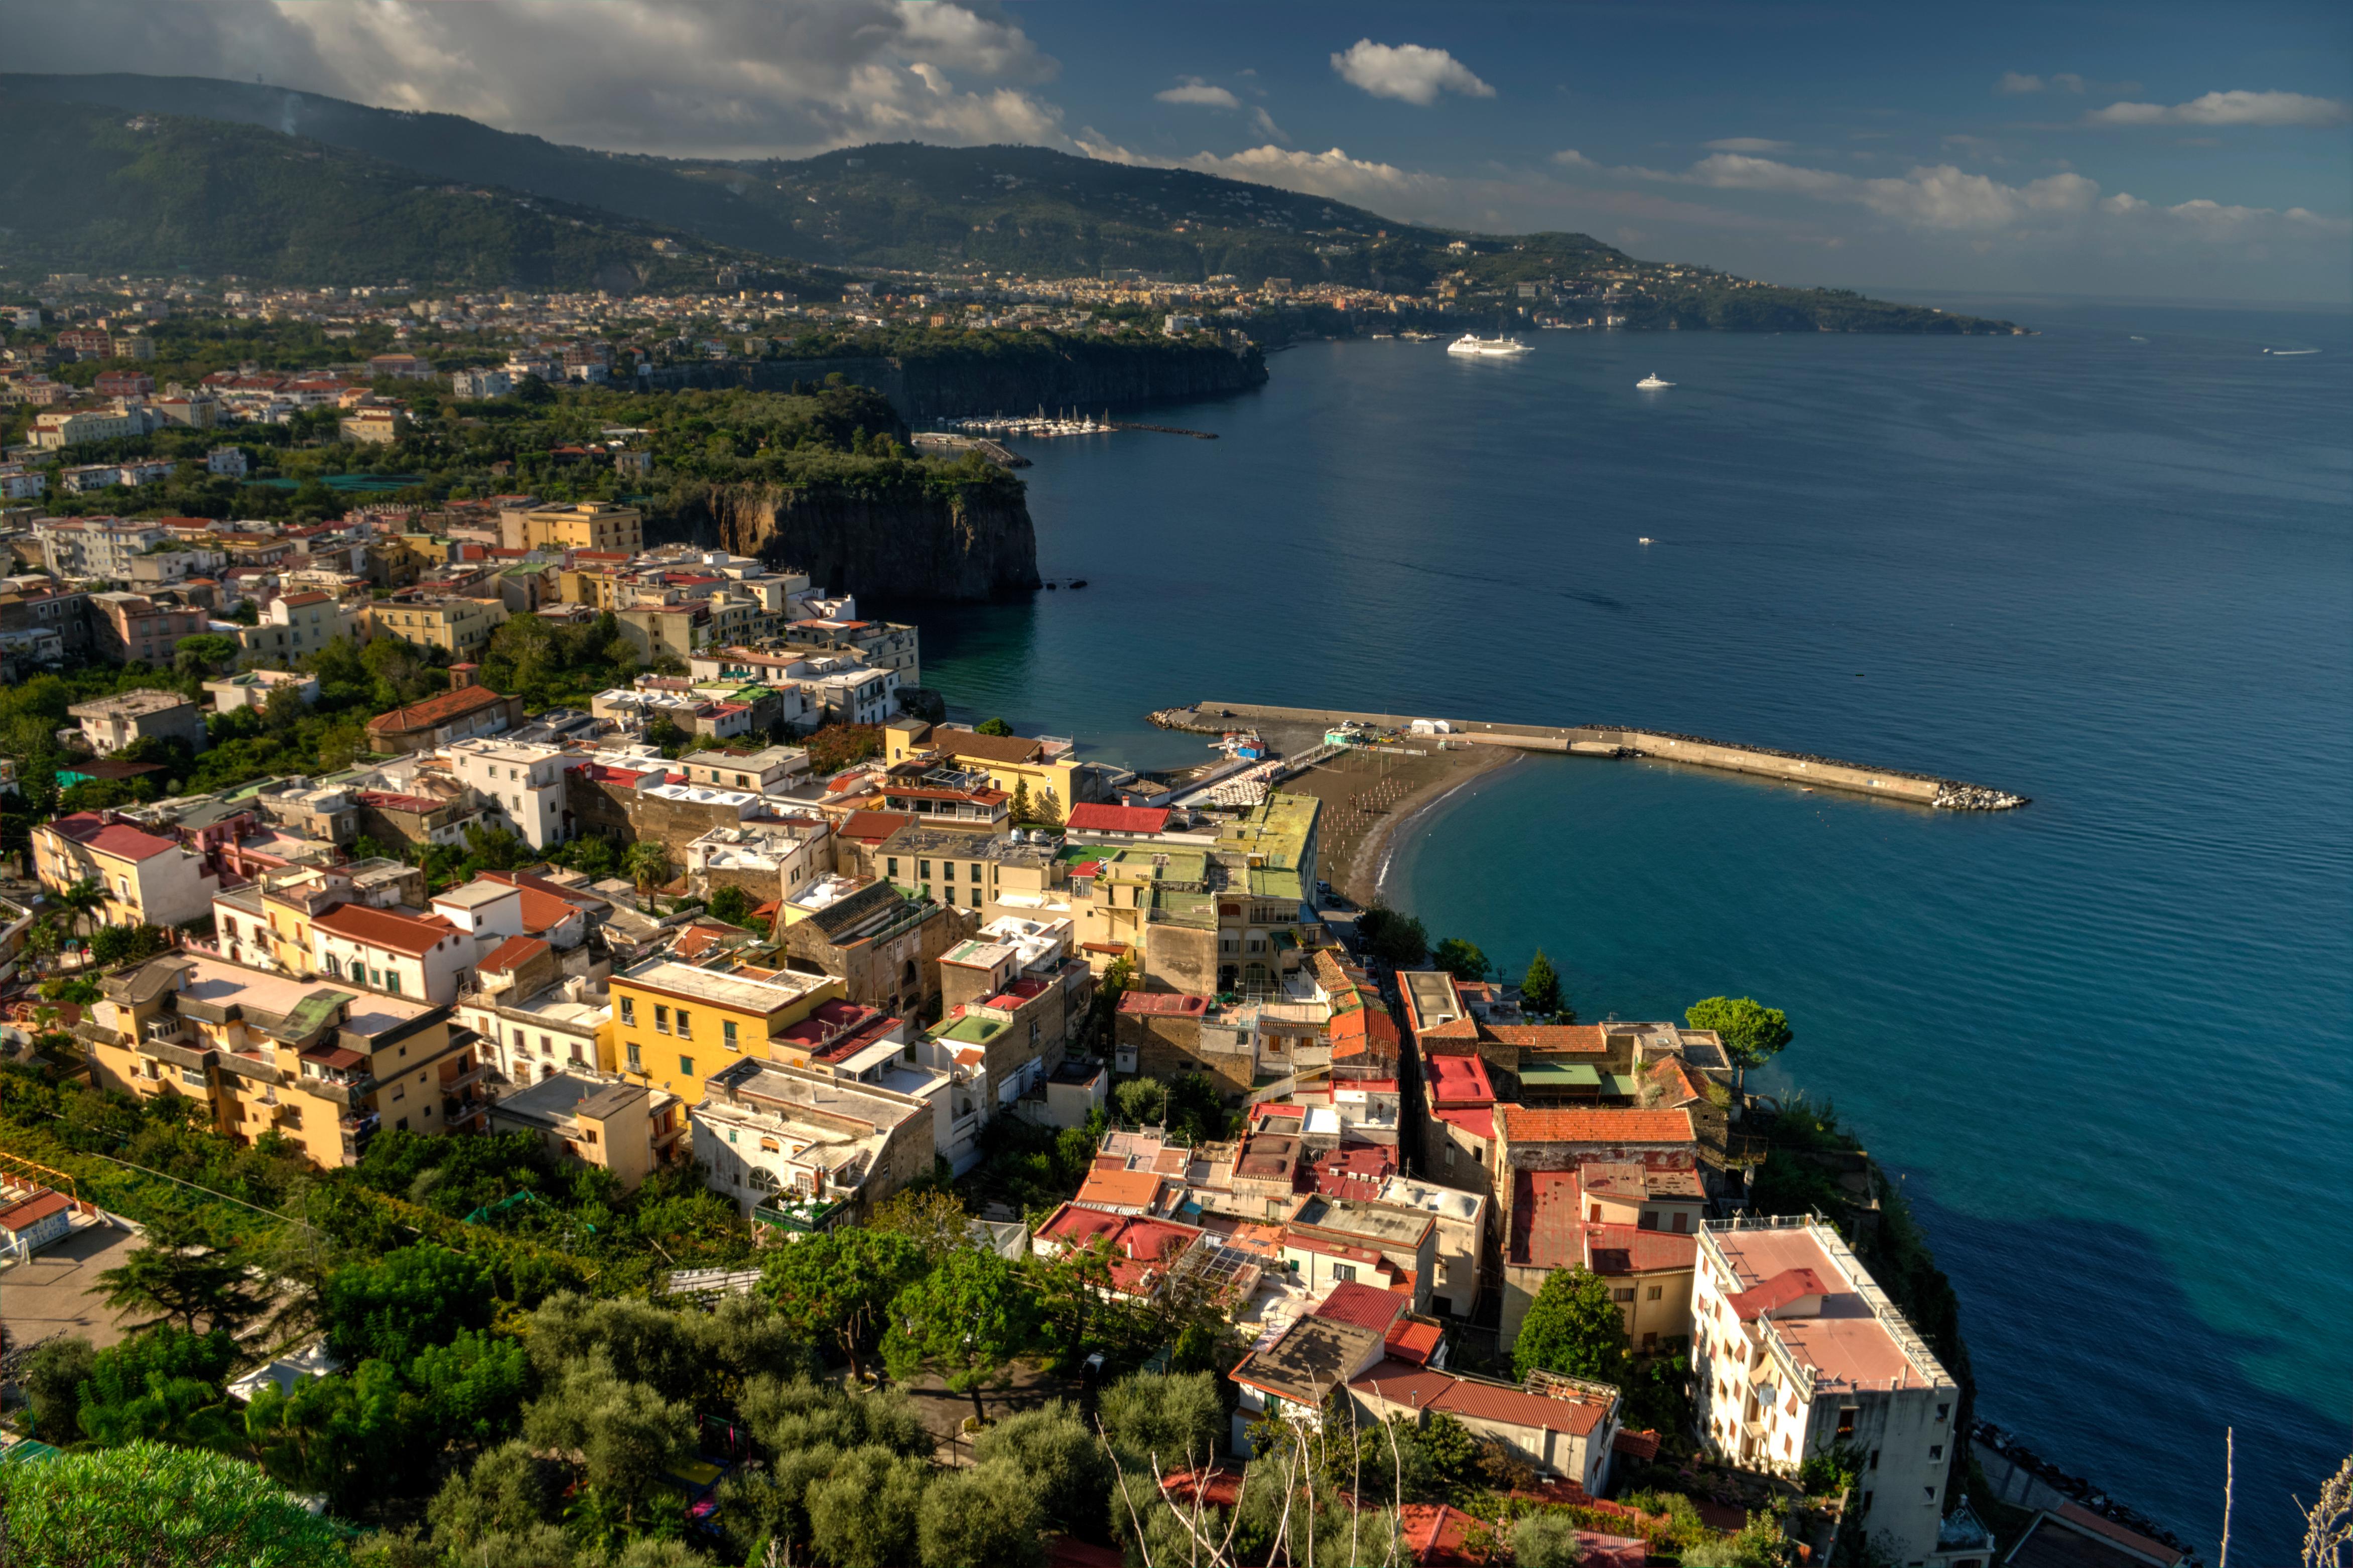 The rape allegedly occurred while the woman was staying at the hotel in Meta di Sorrento, a popular destination for British tourists south of Naples